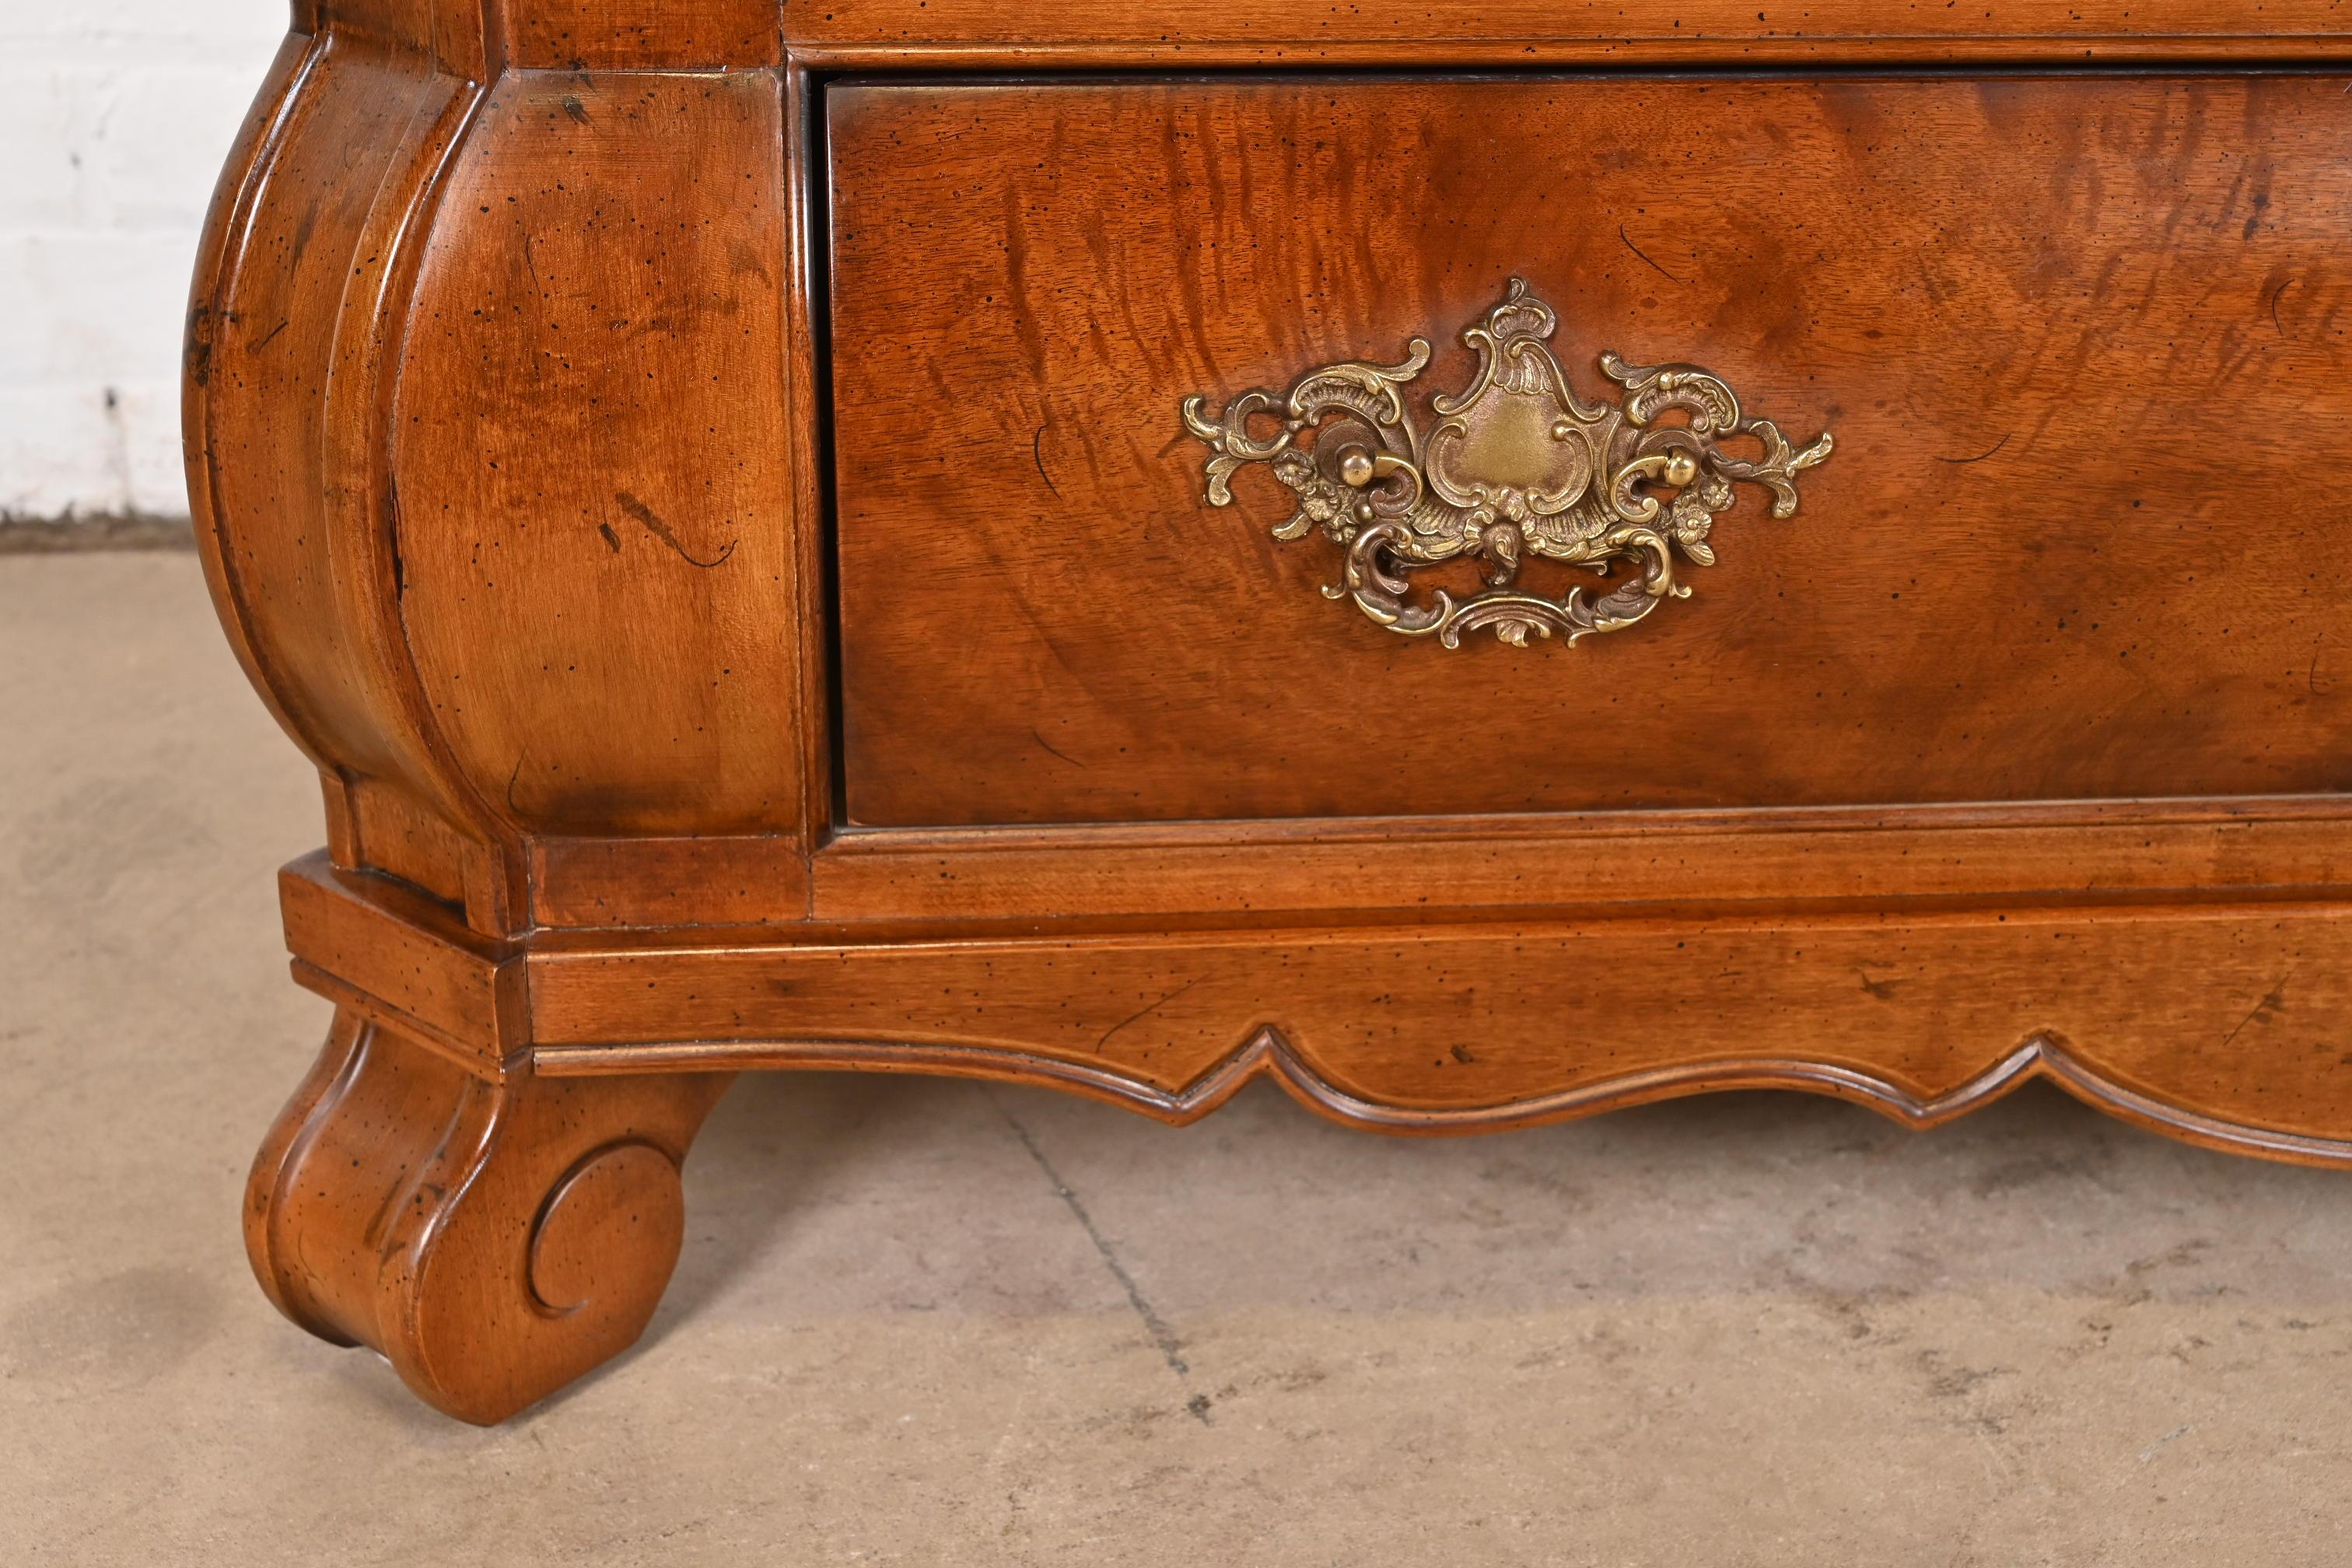 Henredon Italian Baroque Burled Mahogany Bombay Chests or Commodes, Pair For Sale 2